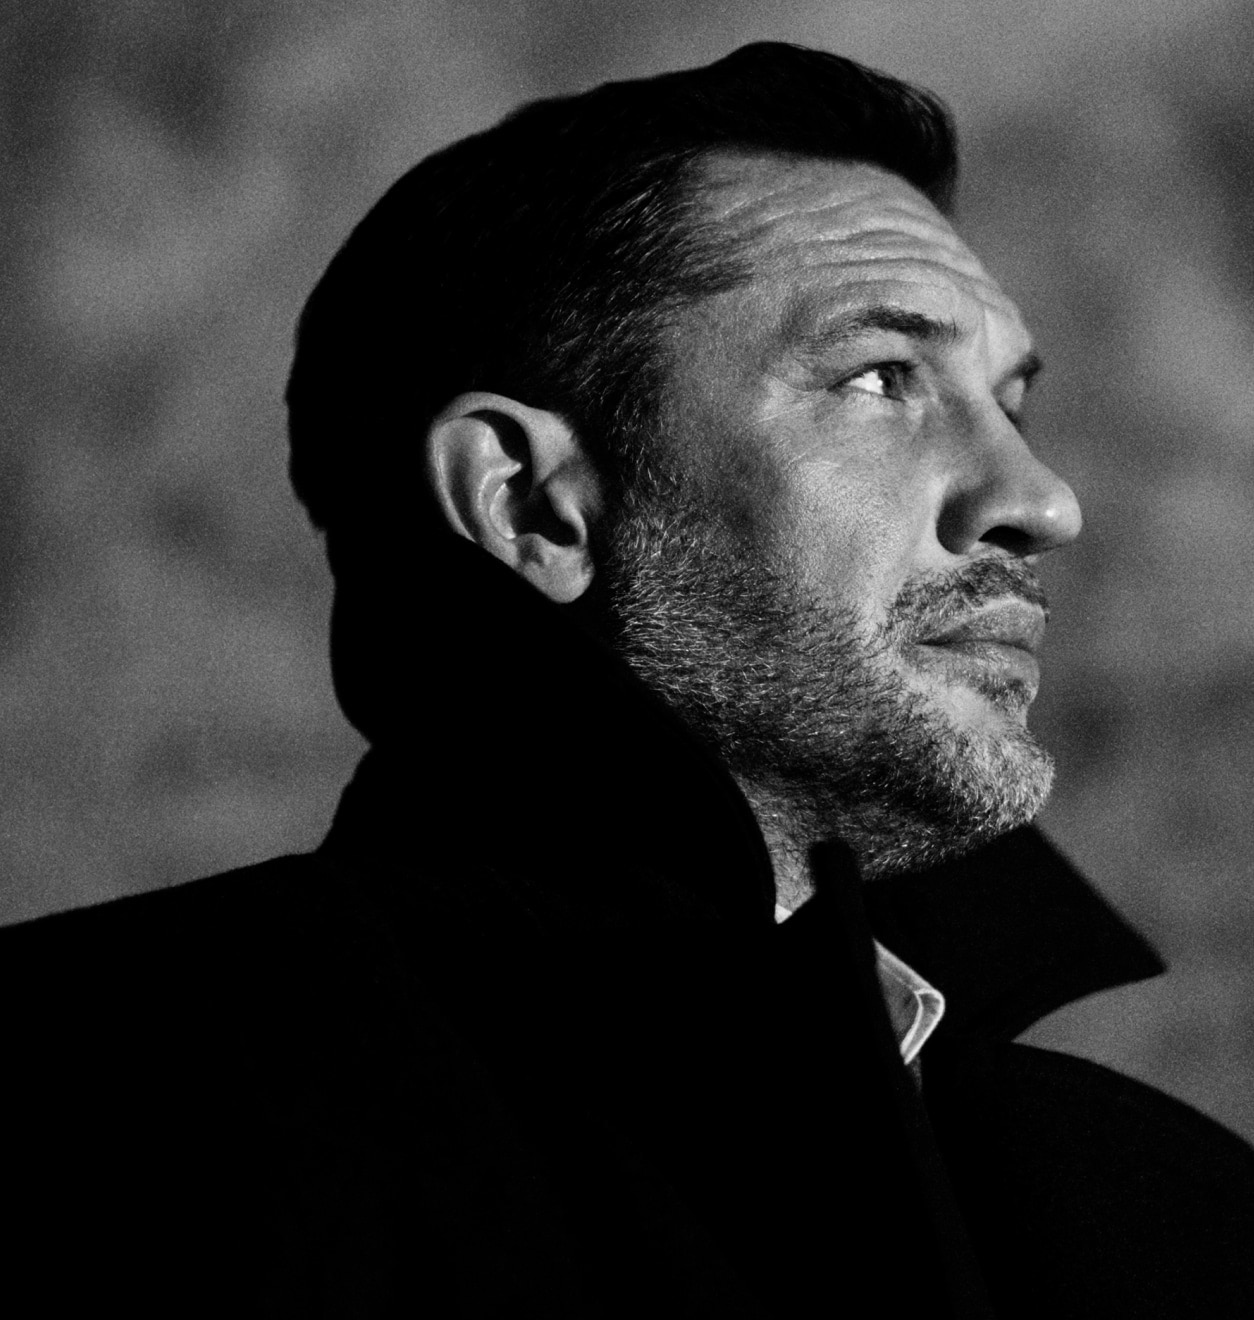 A side portrait of Tom Hardy in black and white, gazing into the distance. He wears a formal coat, with an upturned collar